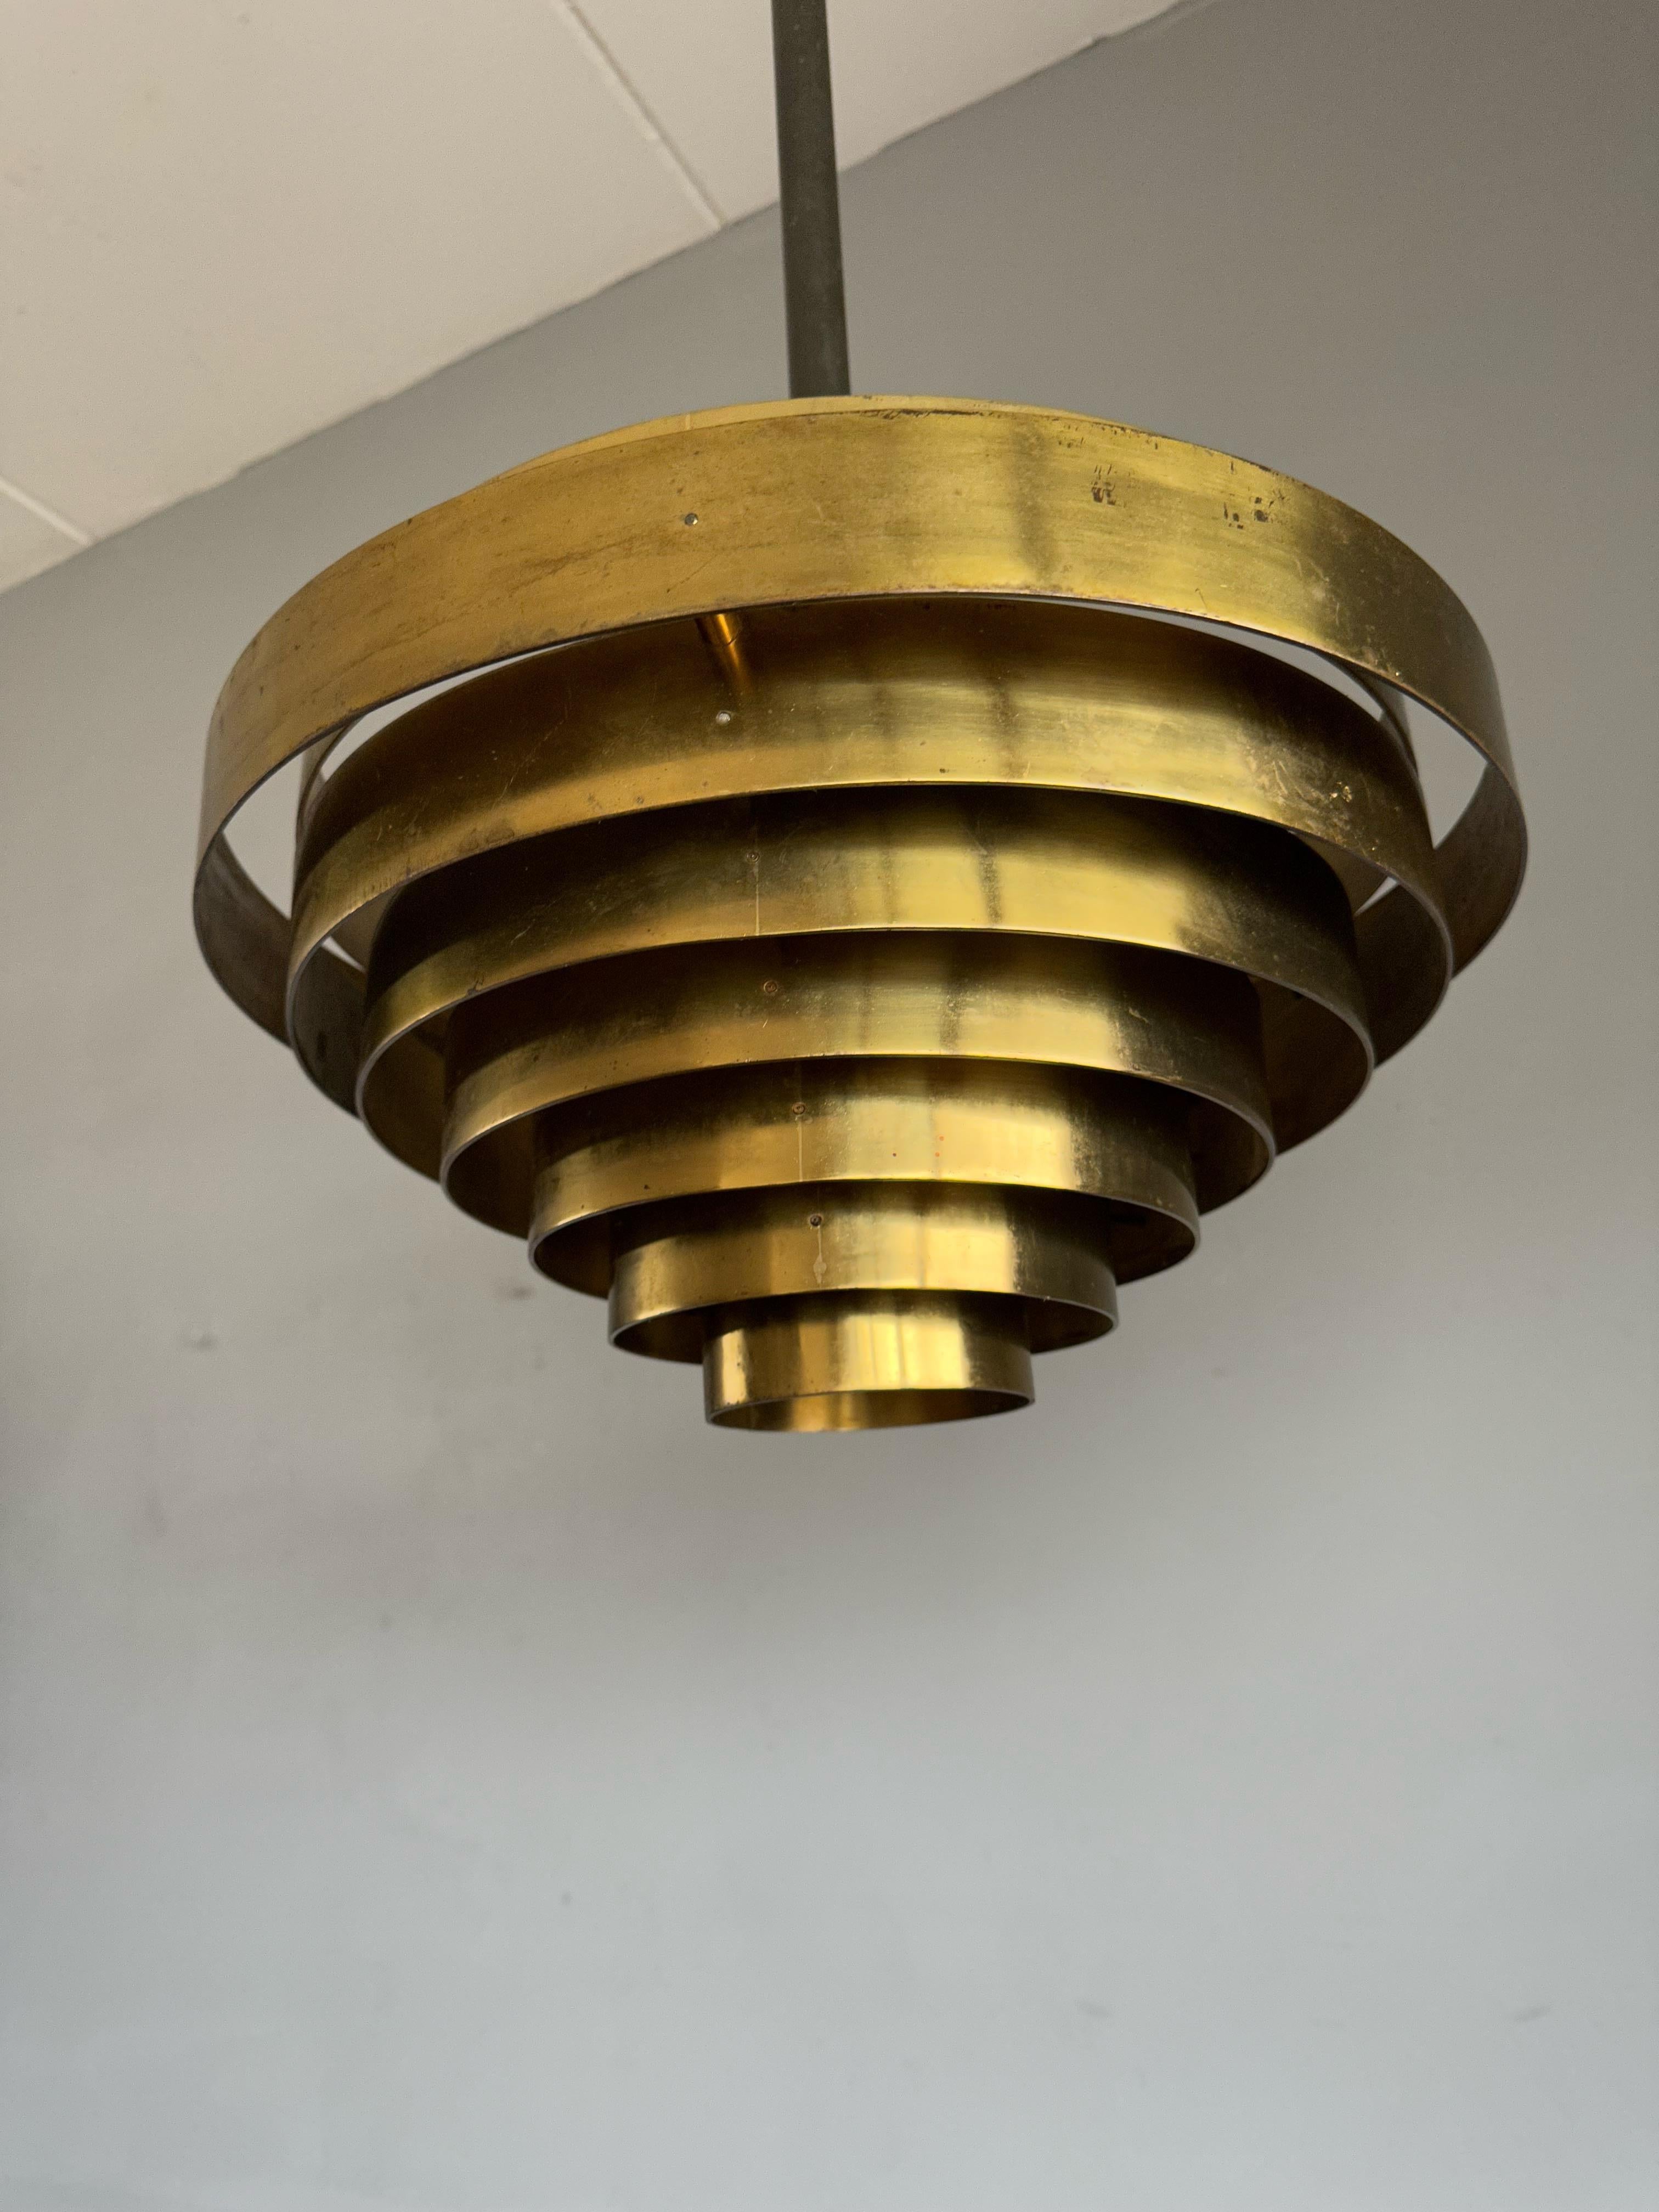 Rare design, three light pendants with layered brass shades.

If you are looking for a striking and extraordinary light fixture to grace your midcentury living or work space then these, European works of lighting art could be ideal for you. Mind